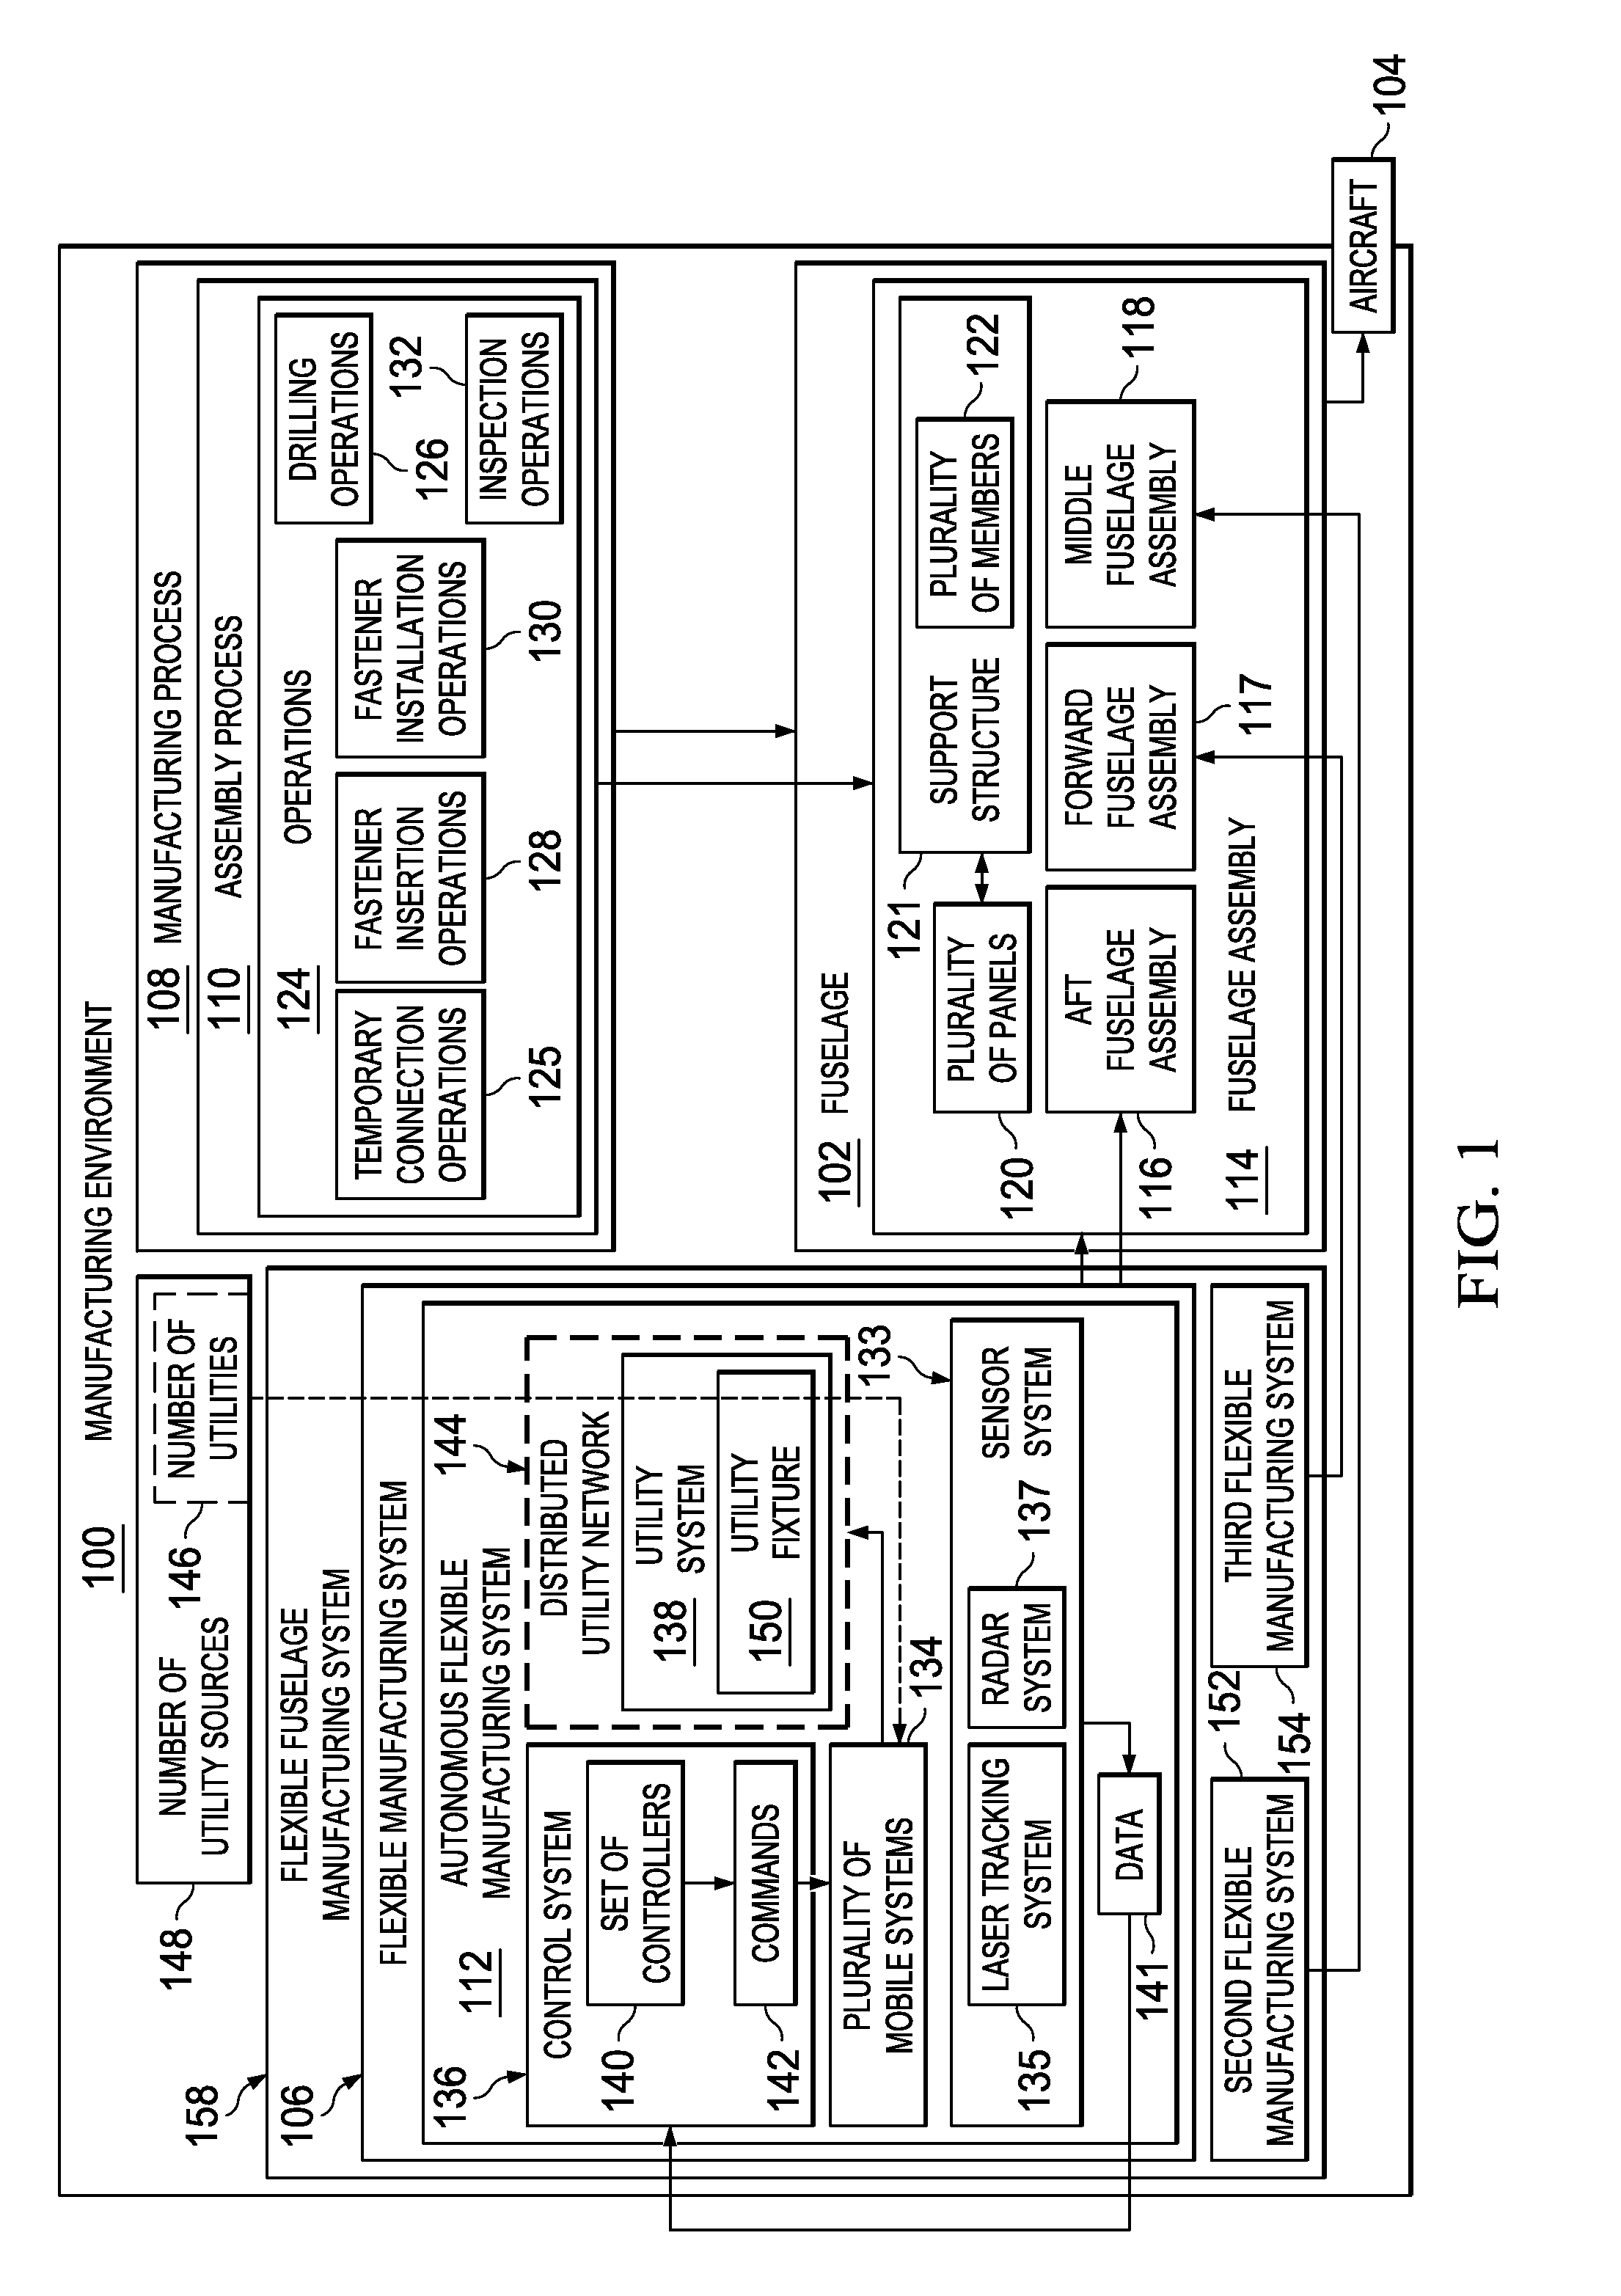 Mobile Platforms for Performing Operations Along an Exterior of a Fuselage Assembly